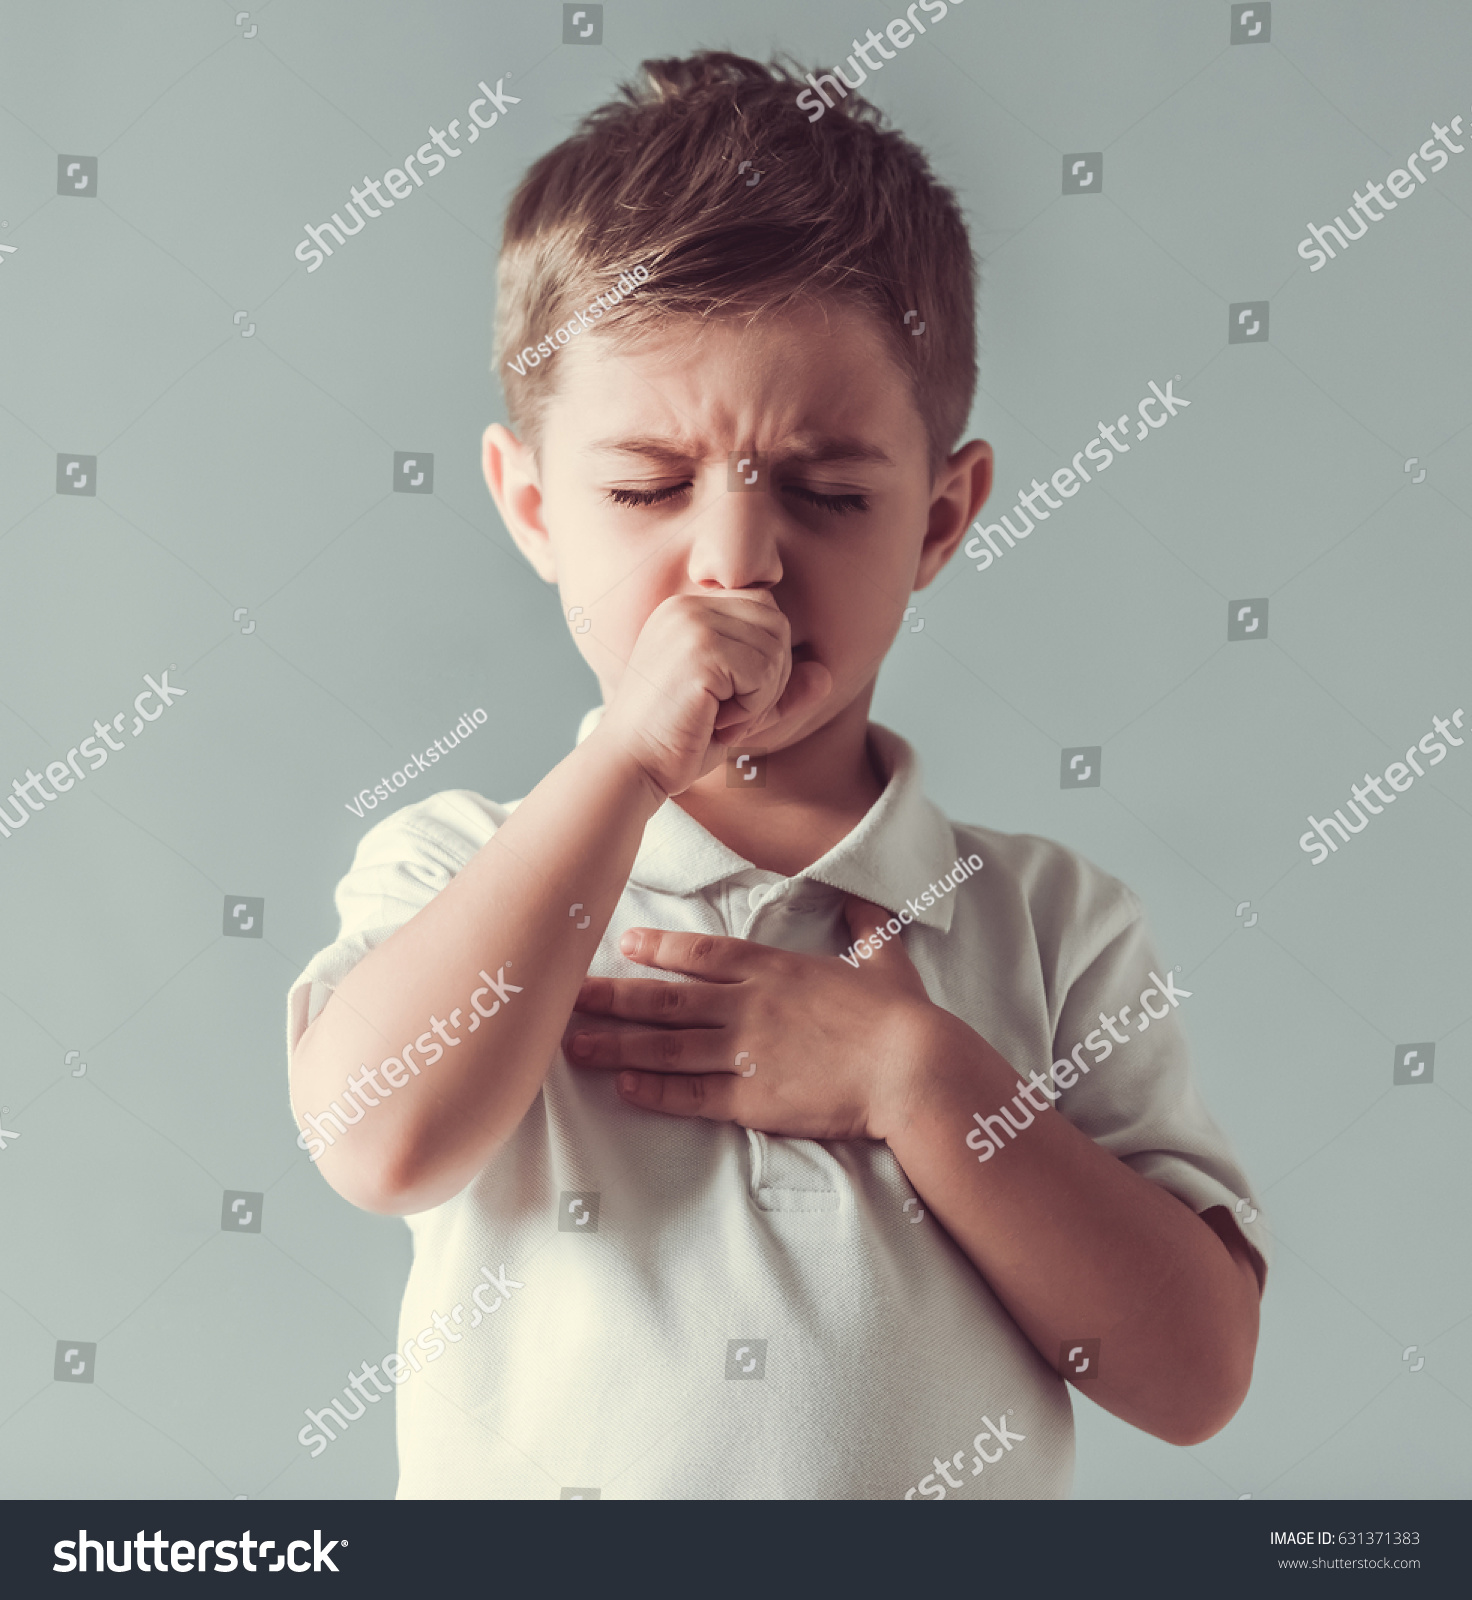 Cute little boy is coughing, on gray background #631371383